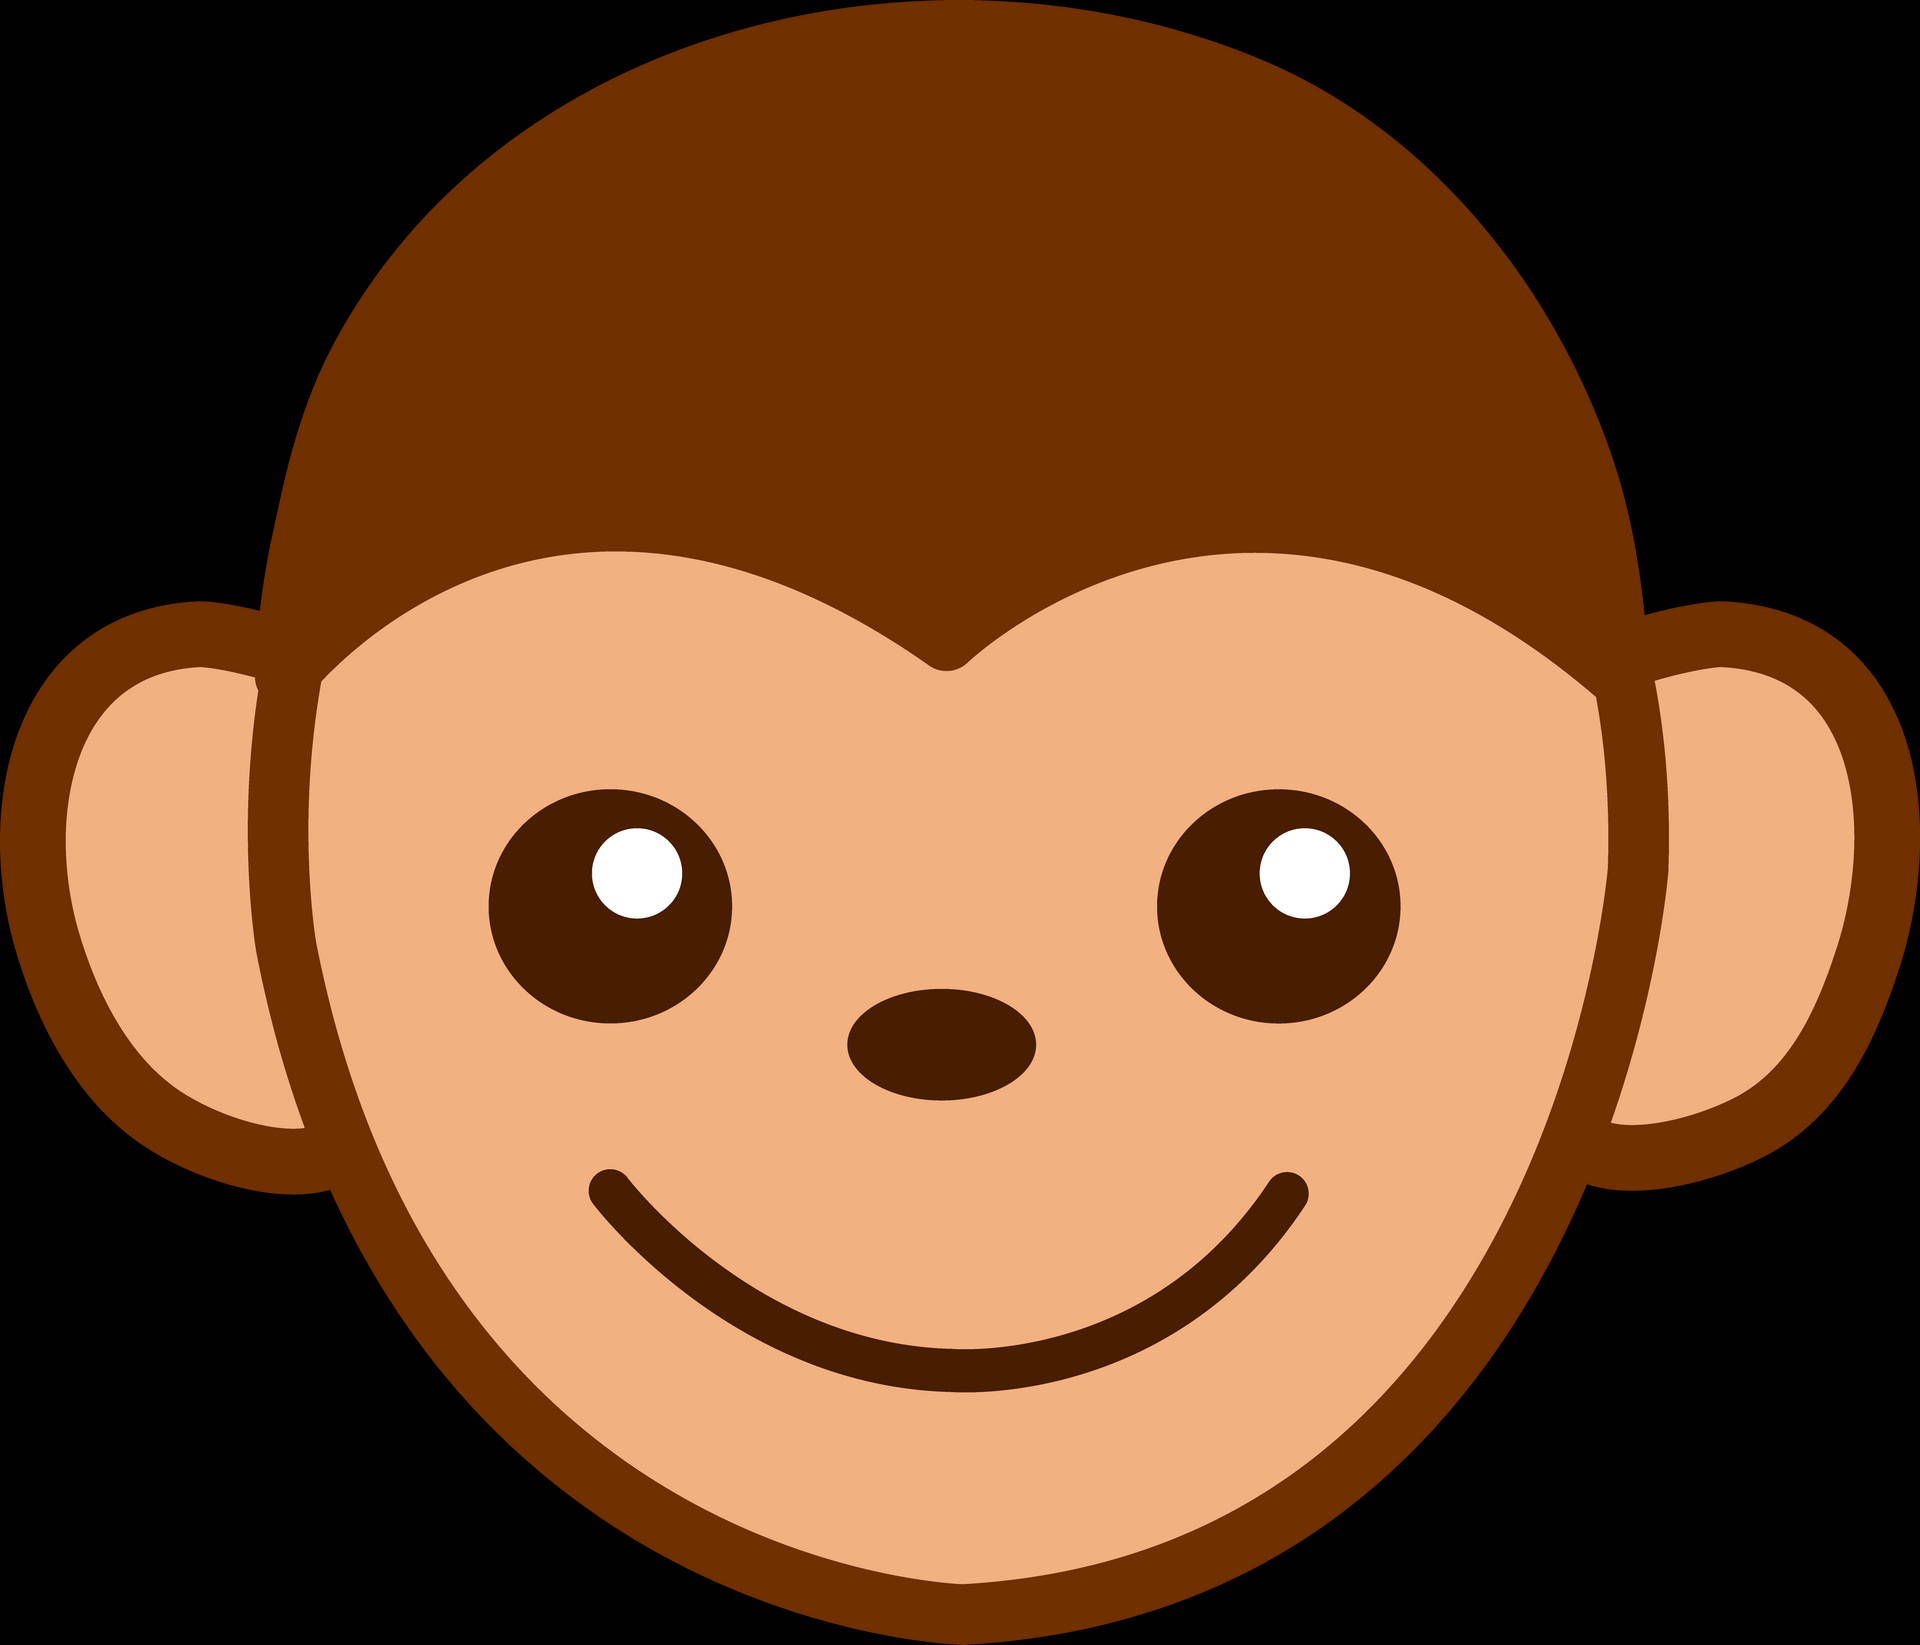 Cute Monkey Face Graphic Background